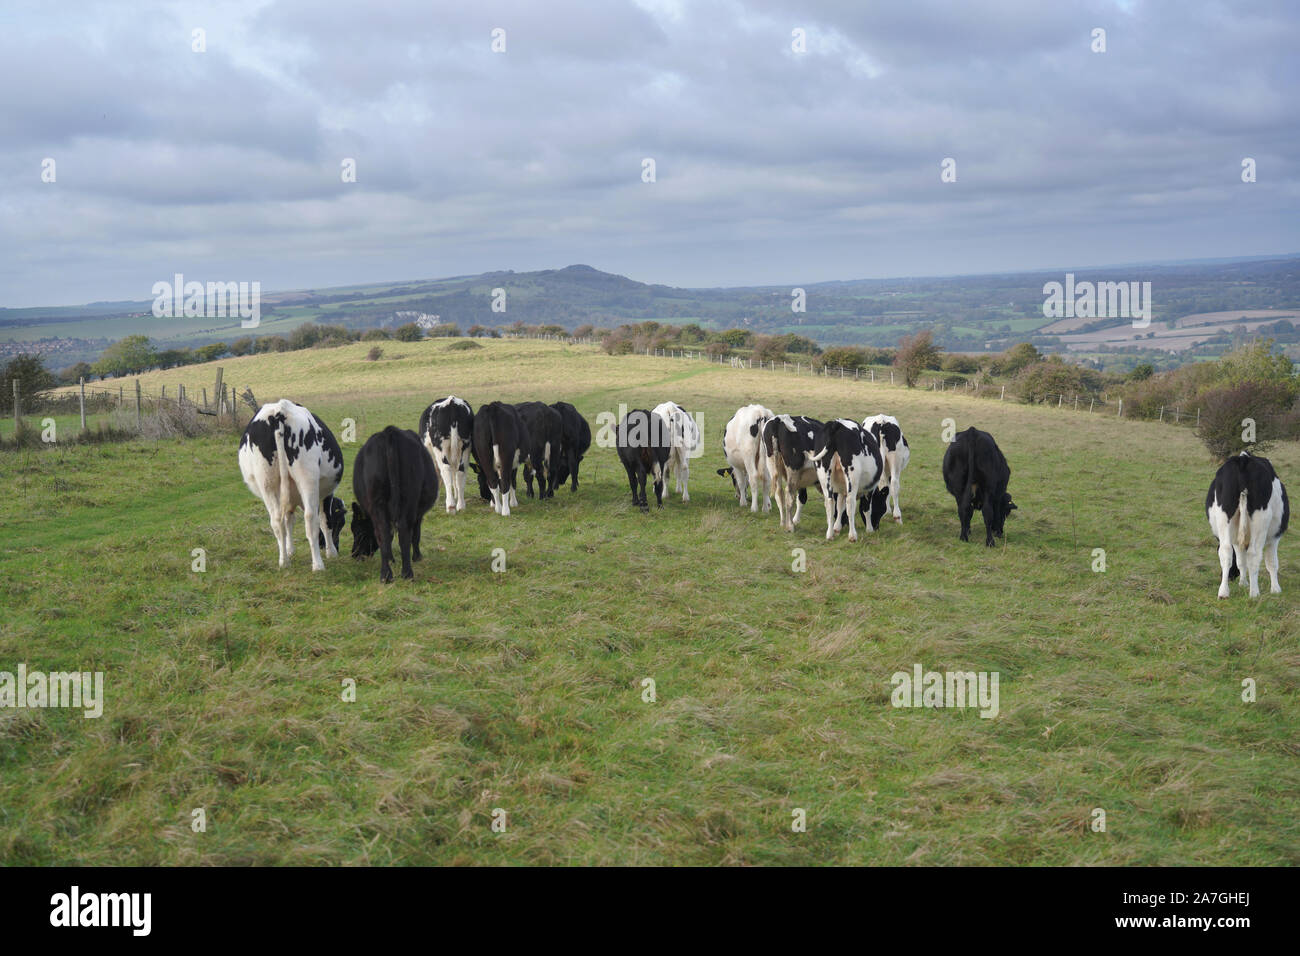 Black and white cows on a field Stock Photo